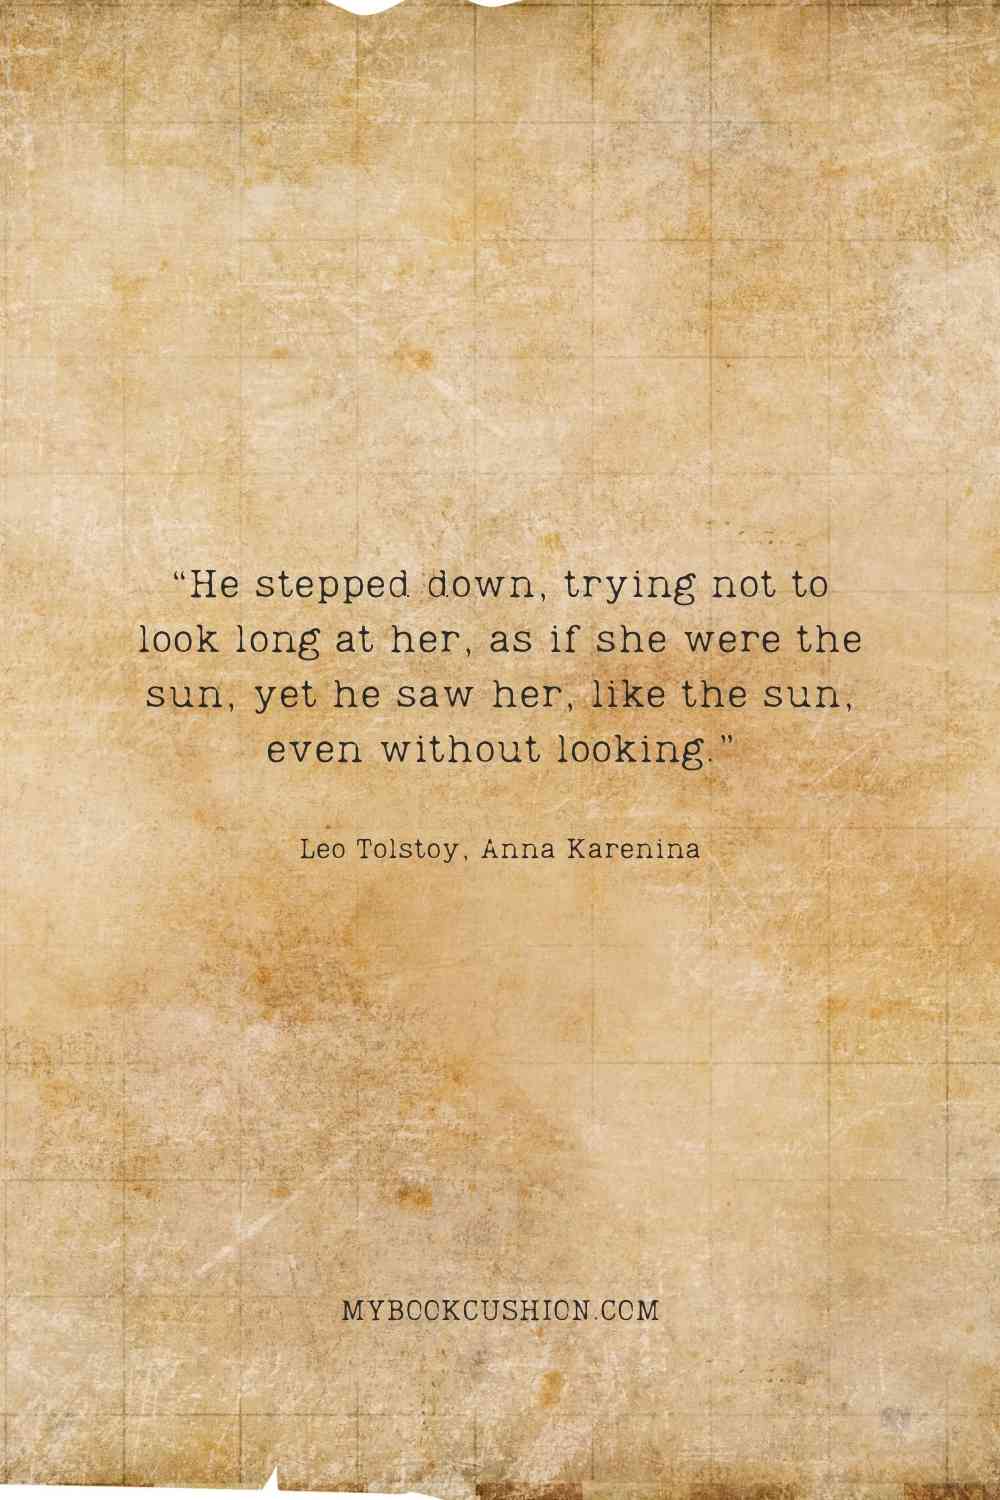 “He stepped down, trying not to look long at her, as if she were the sun, yet he saw her, like the sun, even without looking.” - Leo Tolstoy, Anna Karenina